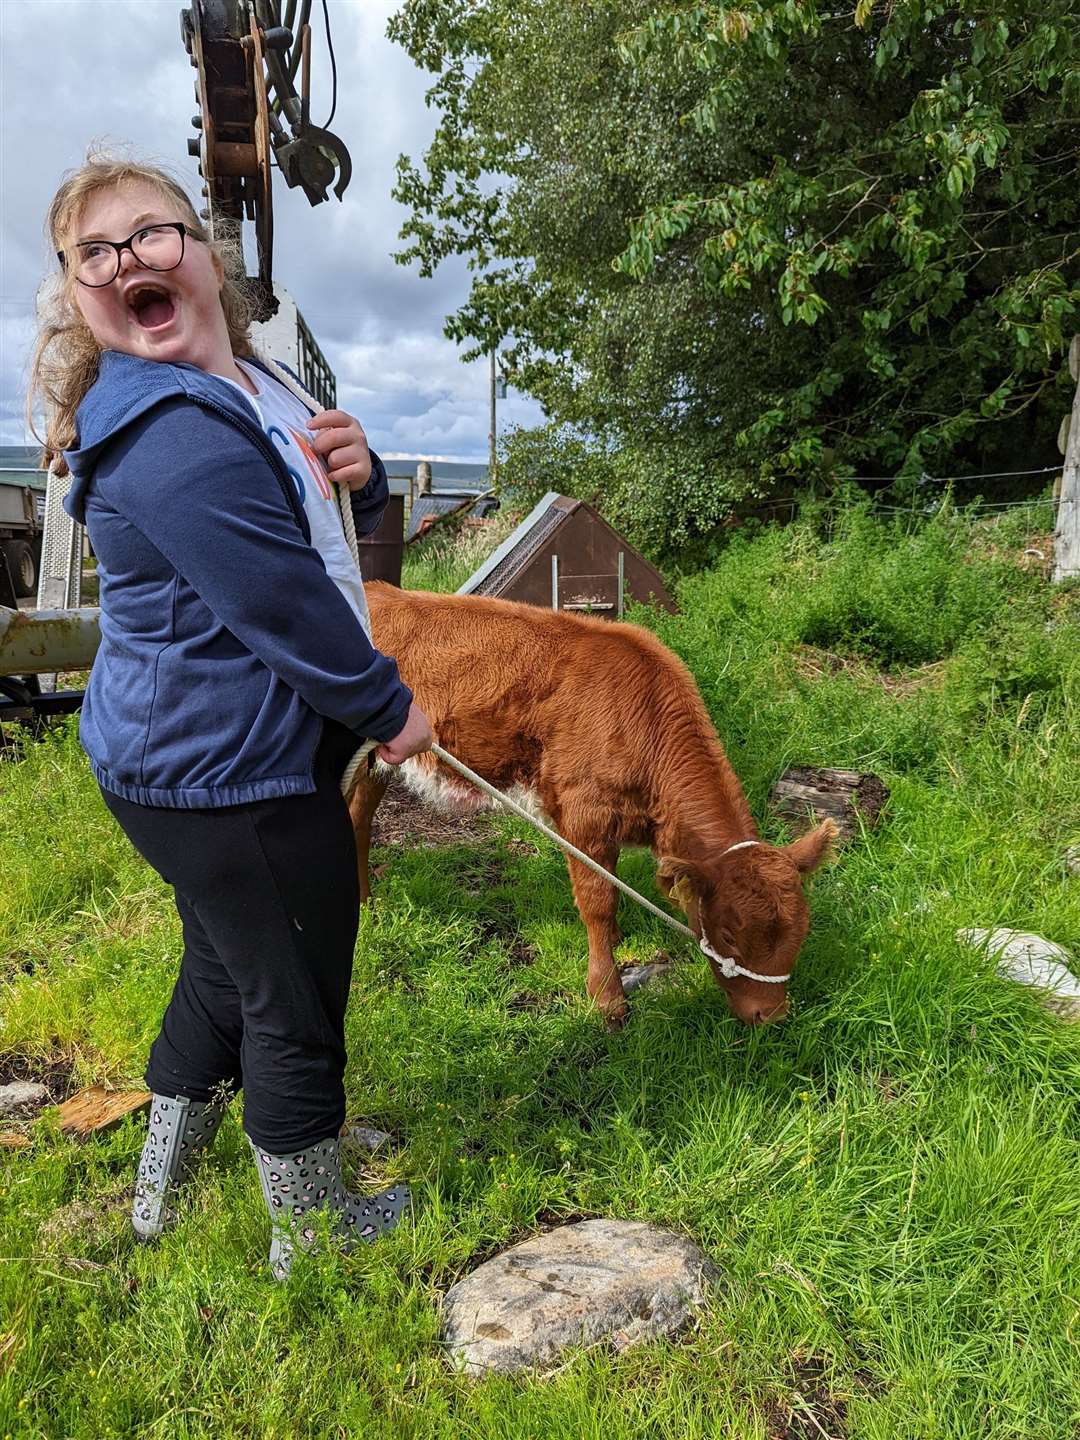 Young Kinlochbervie High School student Brianna Morrison, who has been attending Lochview Rural Training since August 2021, shows her delight at being in charge of a calf.